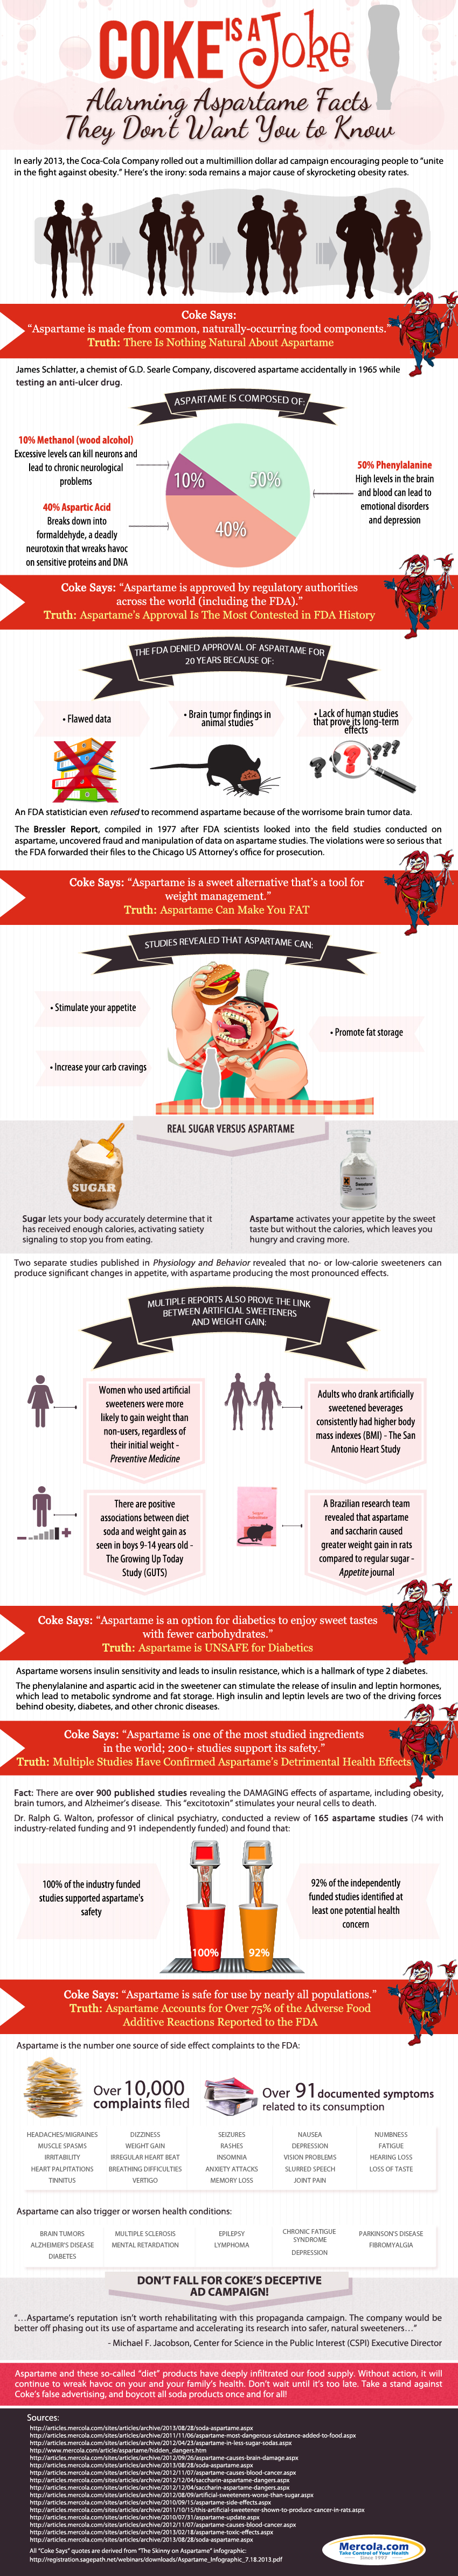 Coke Is a Joke: Alarming Aspartame Facts Infographic